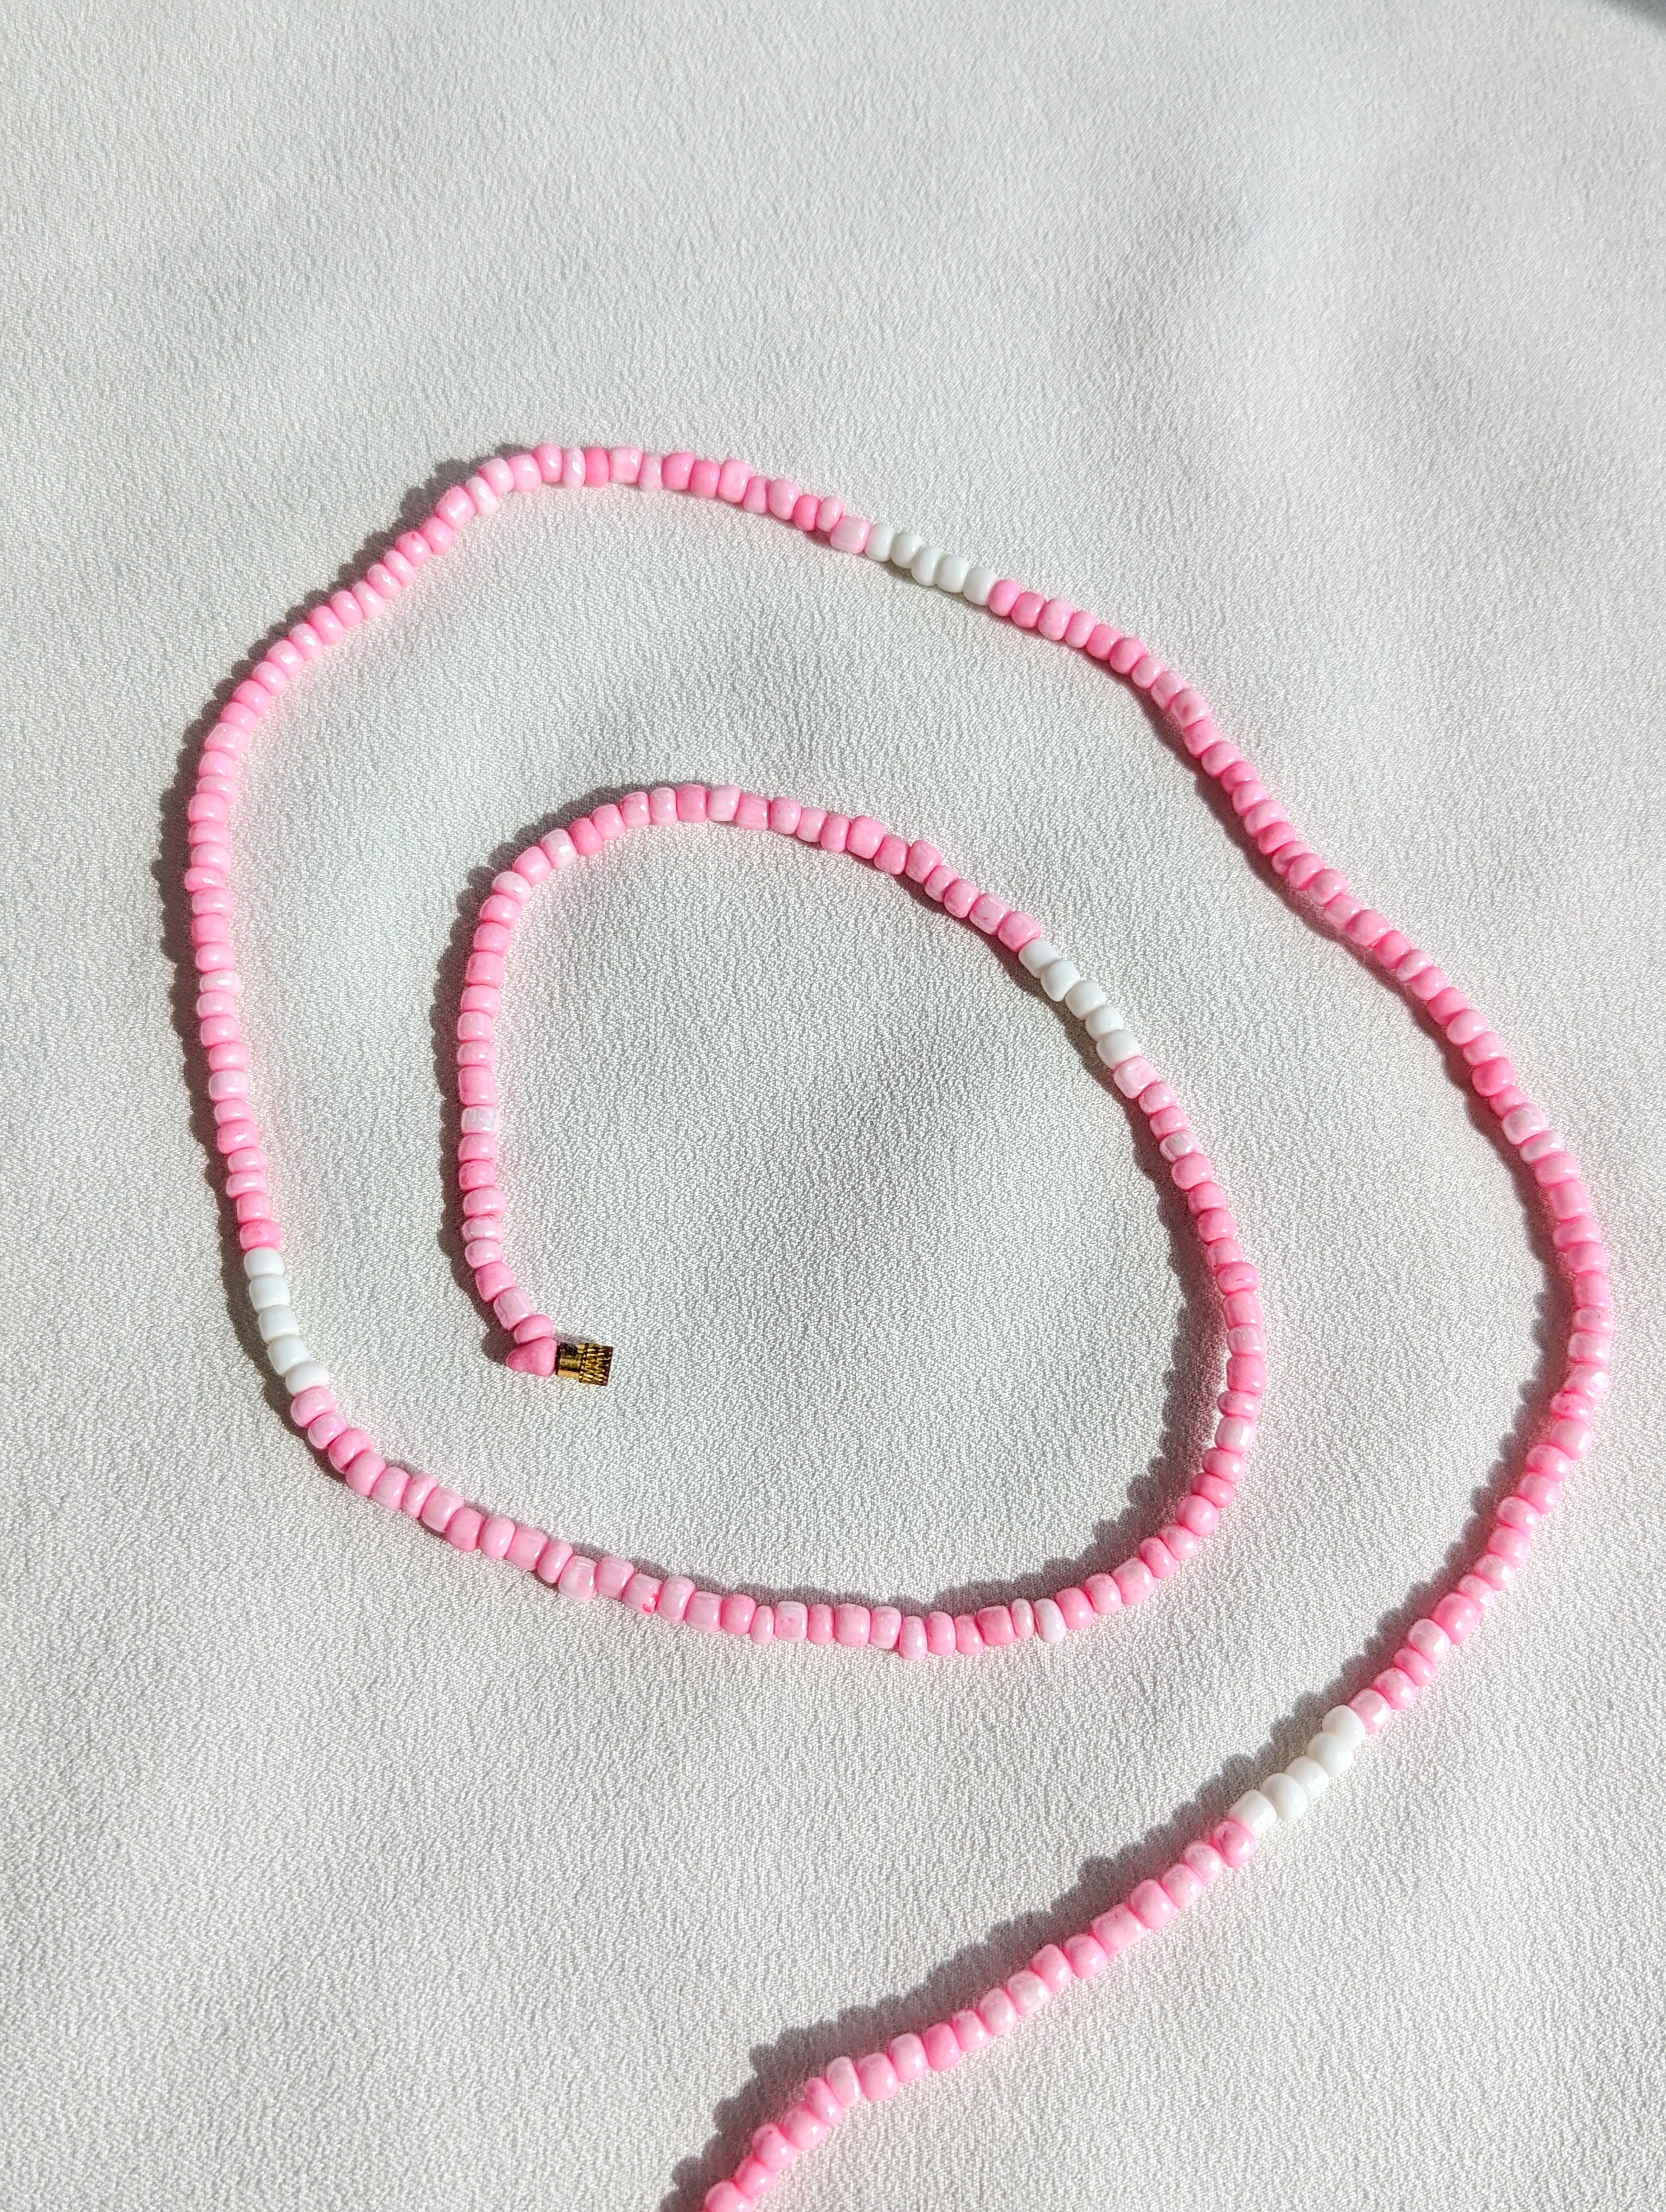 [THE FIFTY FIVE] Belly Chain: Pink/White [Large Beads]